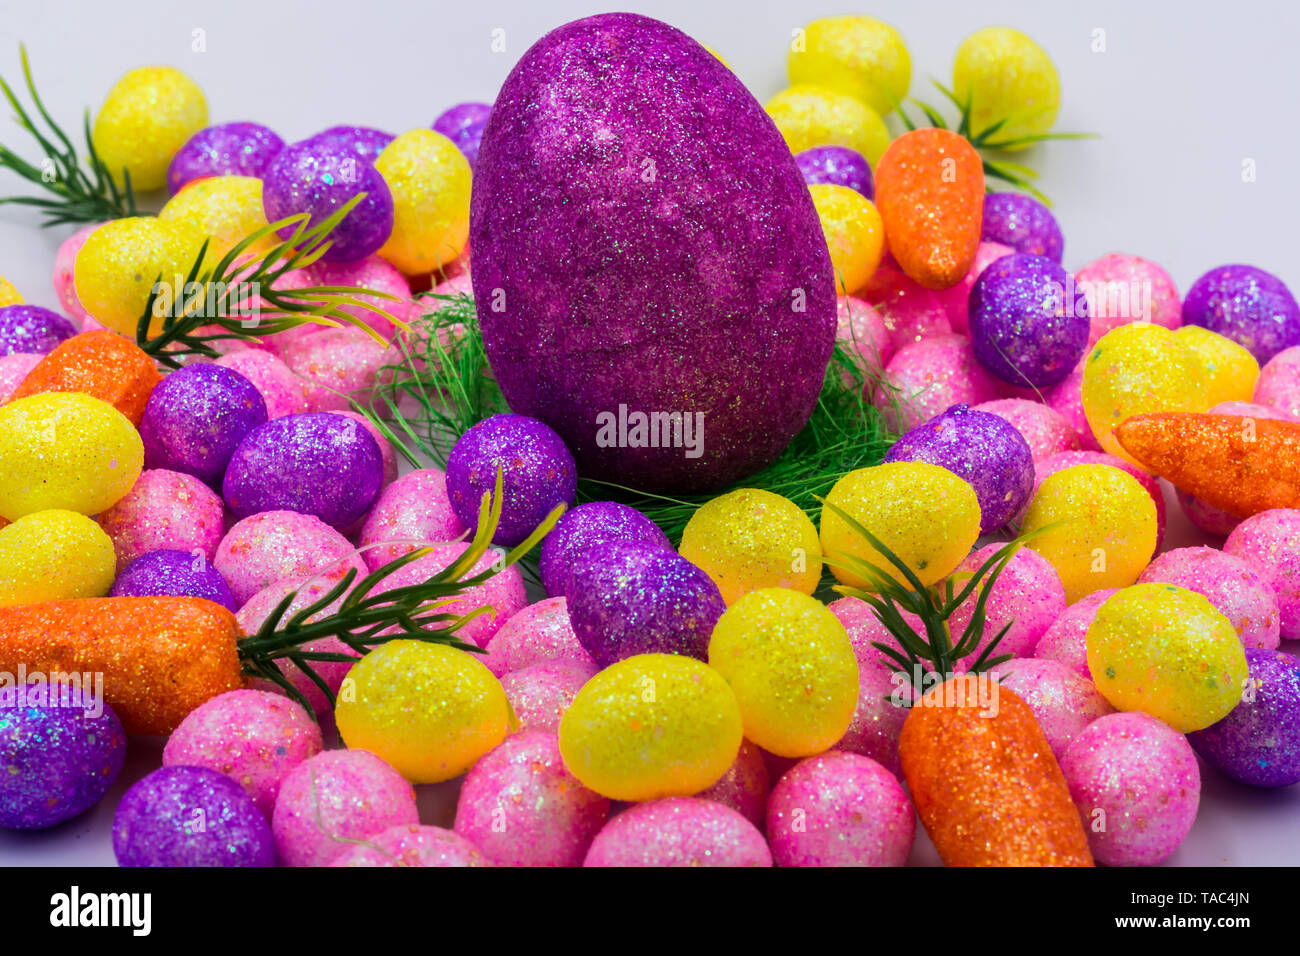 Easter props showing colorful easter egg, easter grass and mini eggs Stock Photo